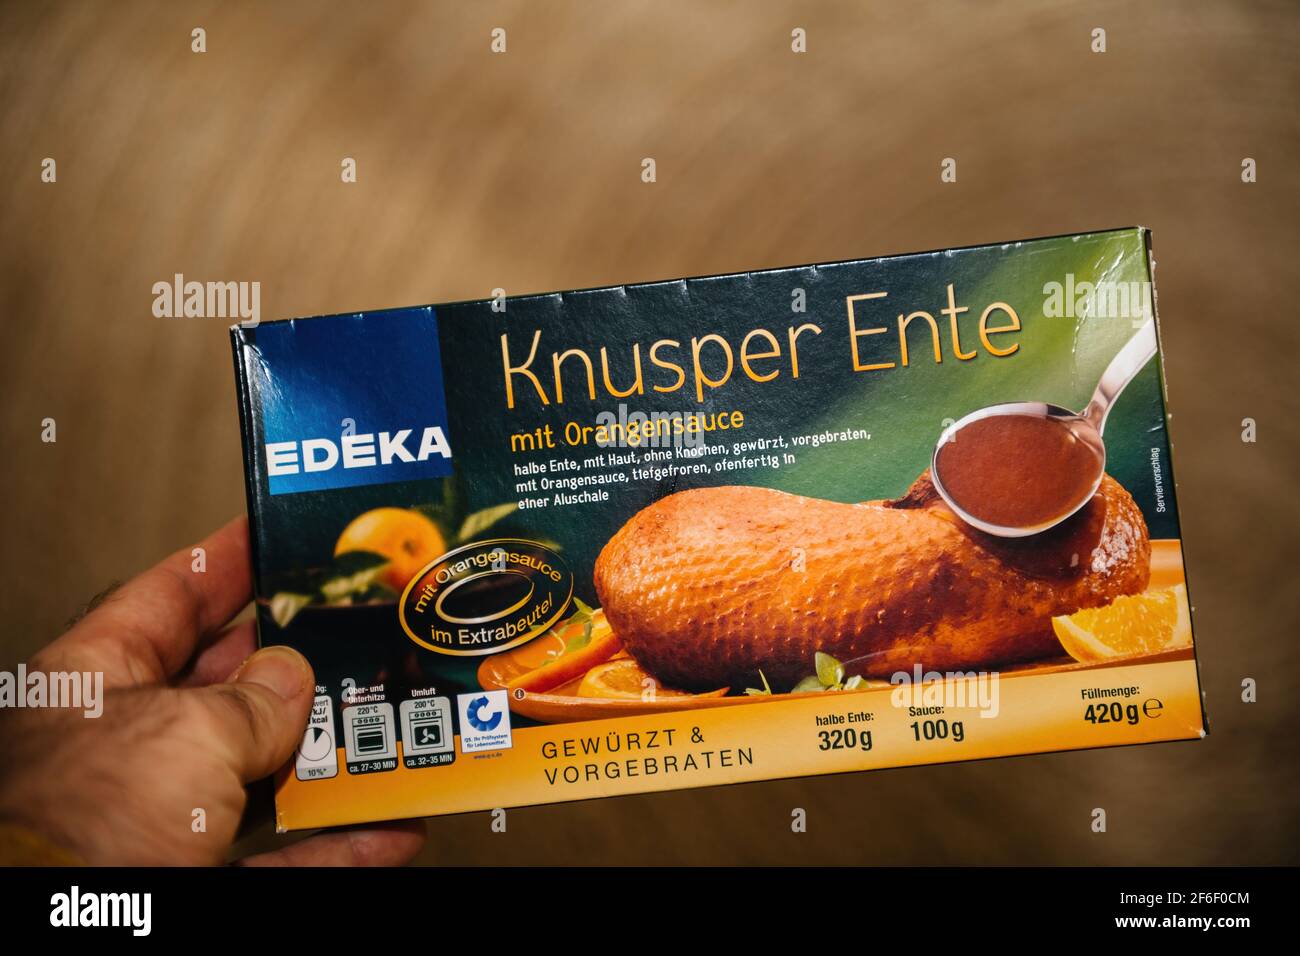 Male hand POV personal point of view at the Edeka Knusper Ente translated  as crispy duck frozen product Stock Photo - Alamy